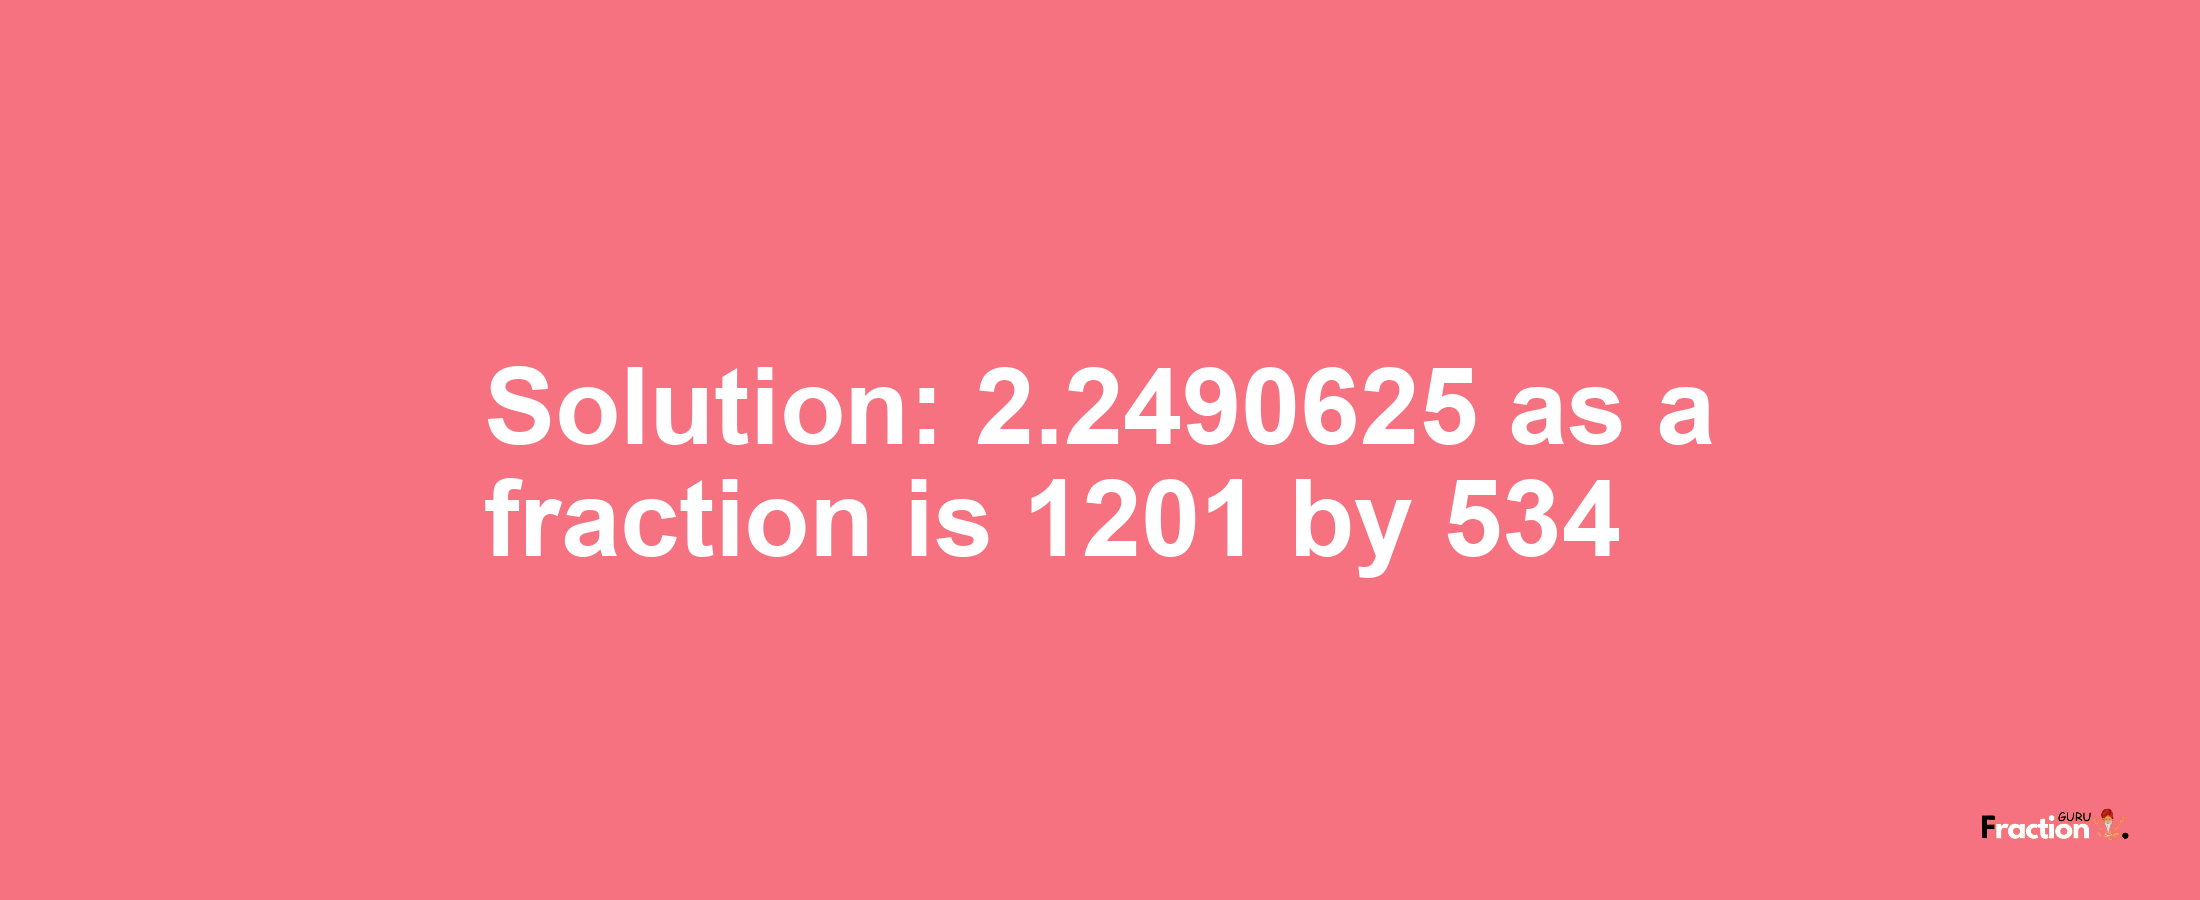 Solution:2.2490625 as a fraction is 1201/534